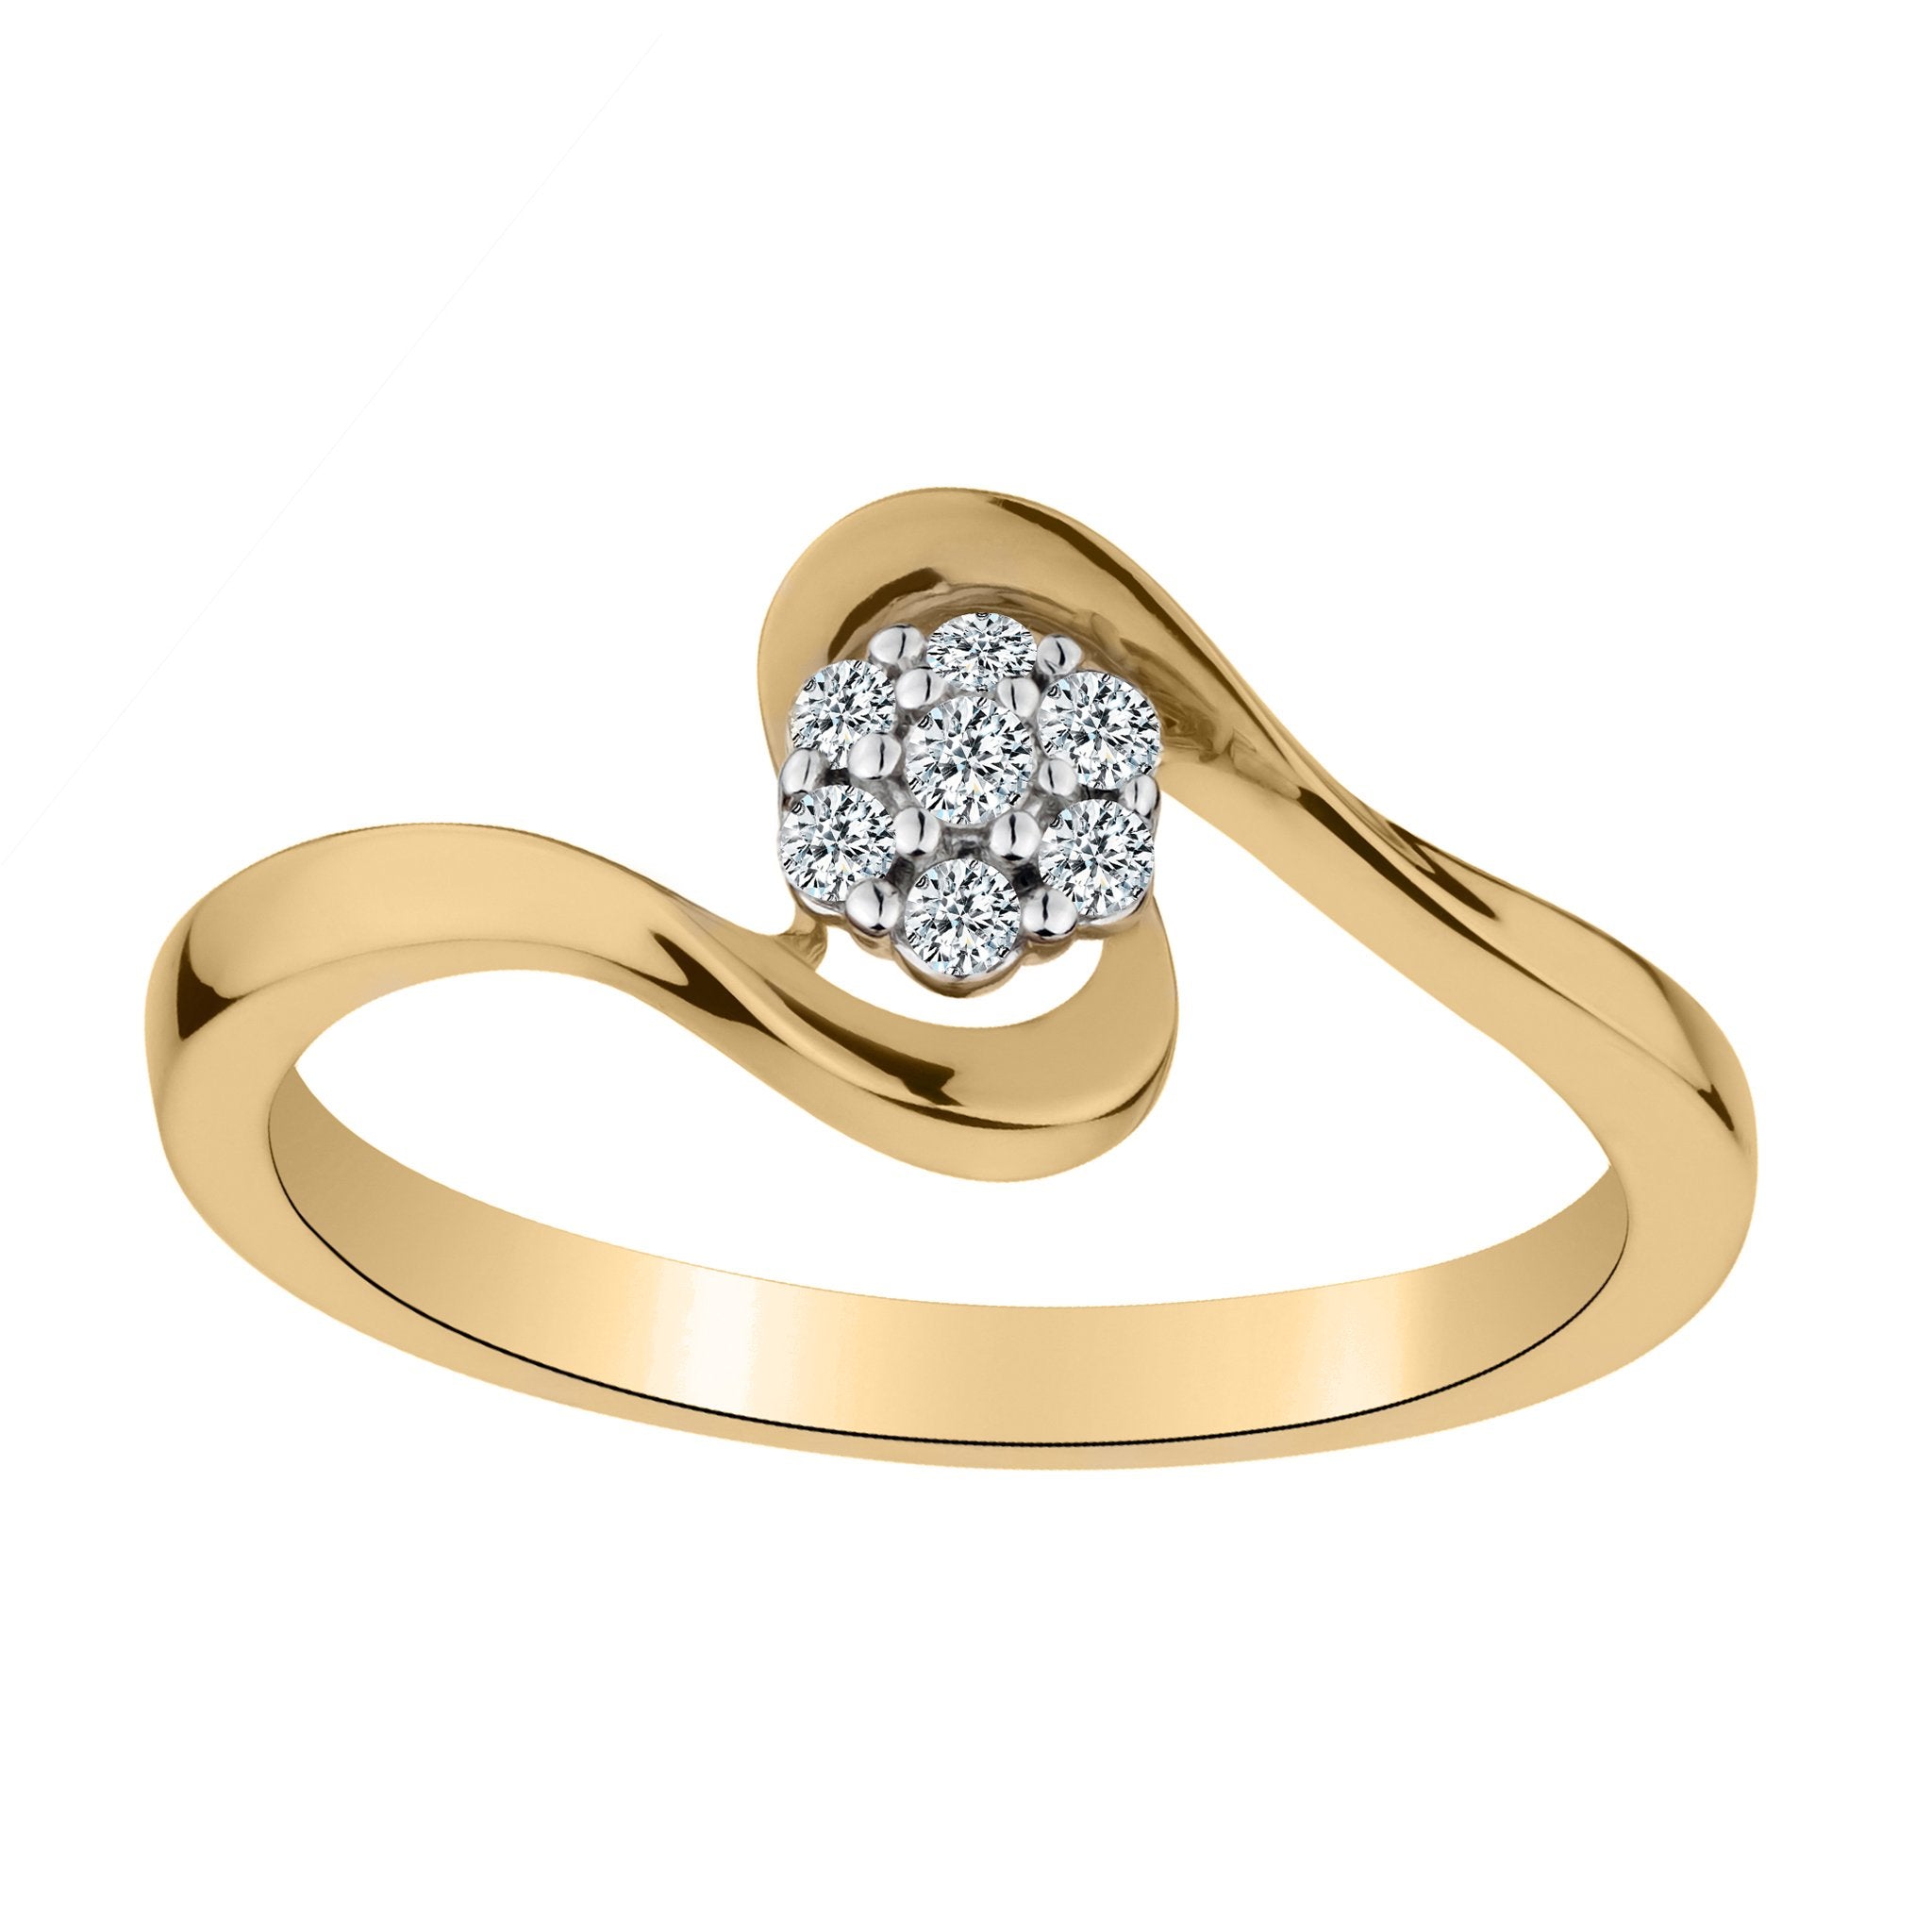 .10 CARAT DIAMOND RING, 10kt YELLOW GOLD. Fashion Rings - Griffin Jewellery Designs